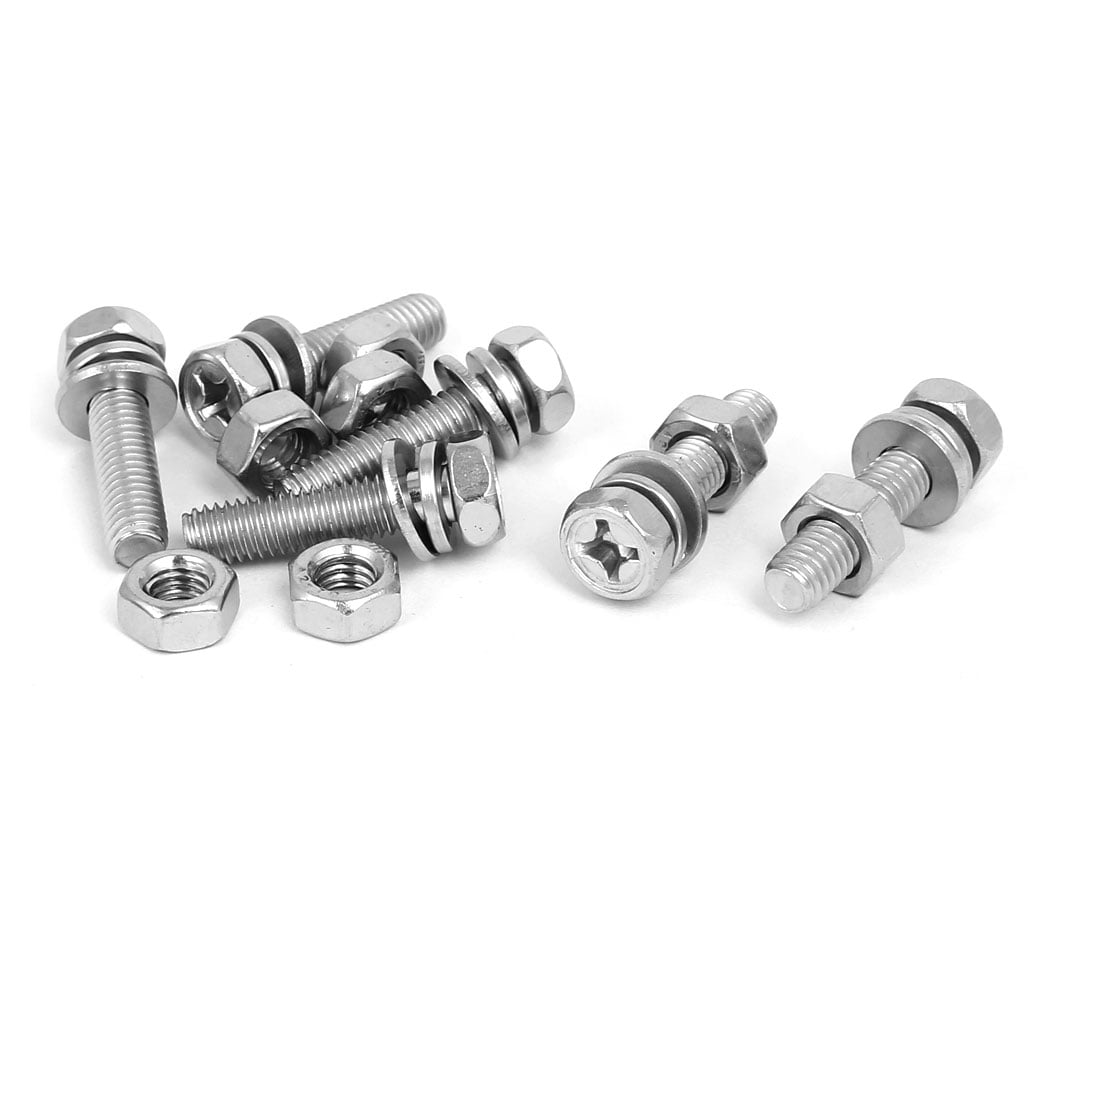 Pack of 10 A2 Stainless Steel Fully Threaded Hex Bolt Setscrew M6 6mm x 25mm